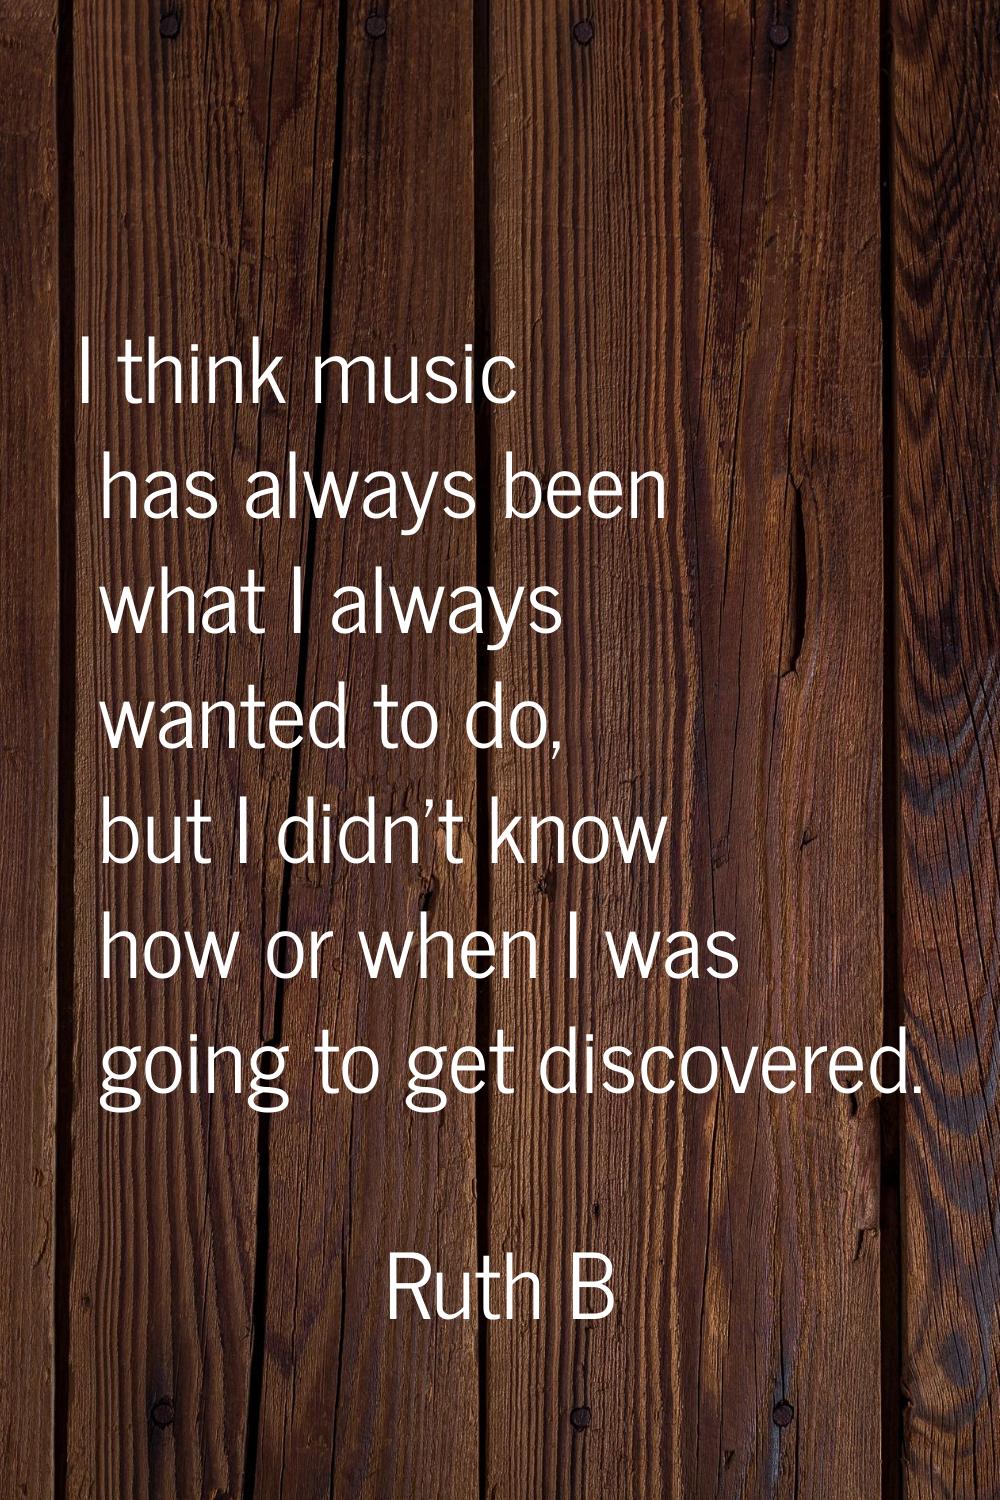 I think music has always been what I always wanted to do, but I didn't know how or when I was going